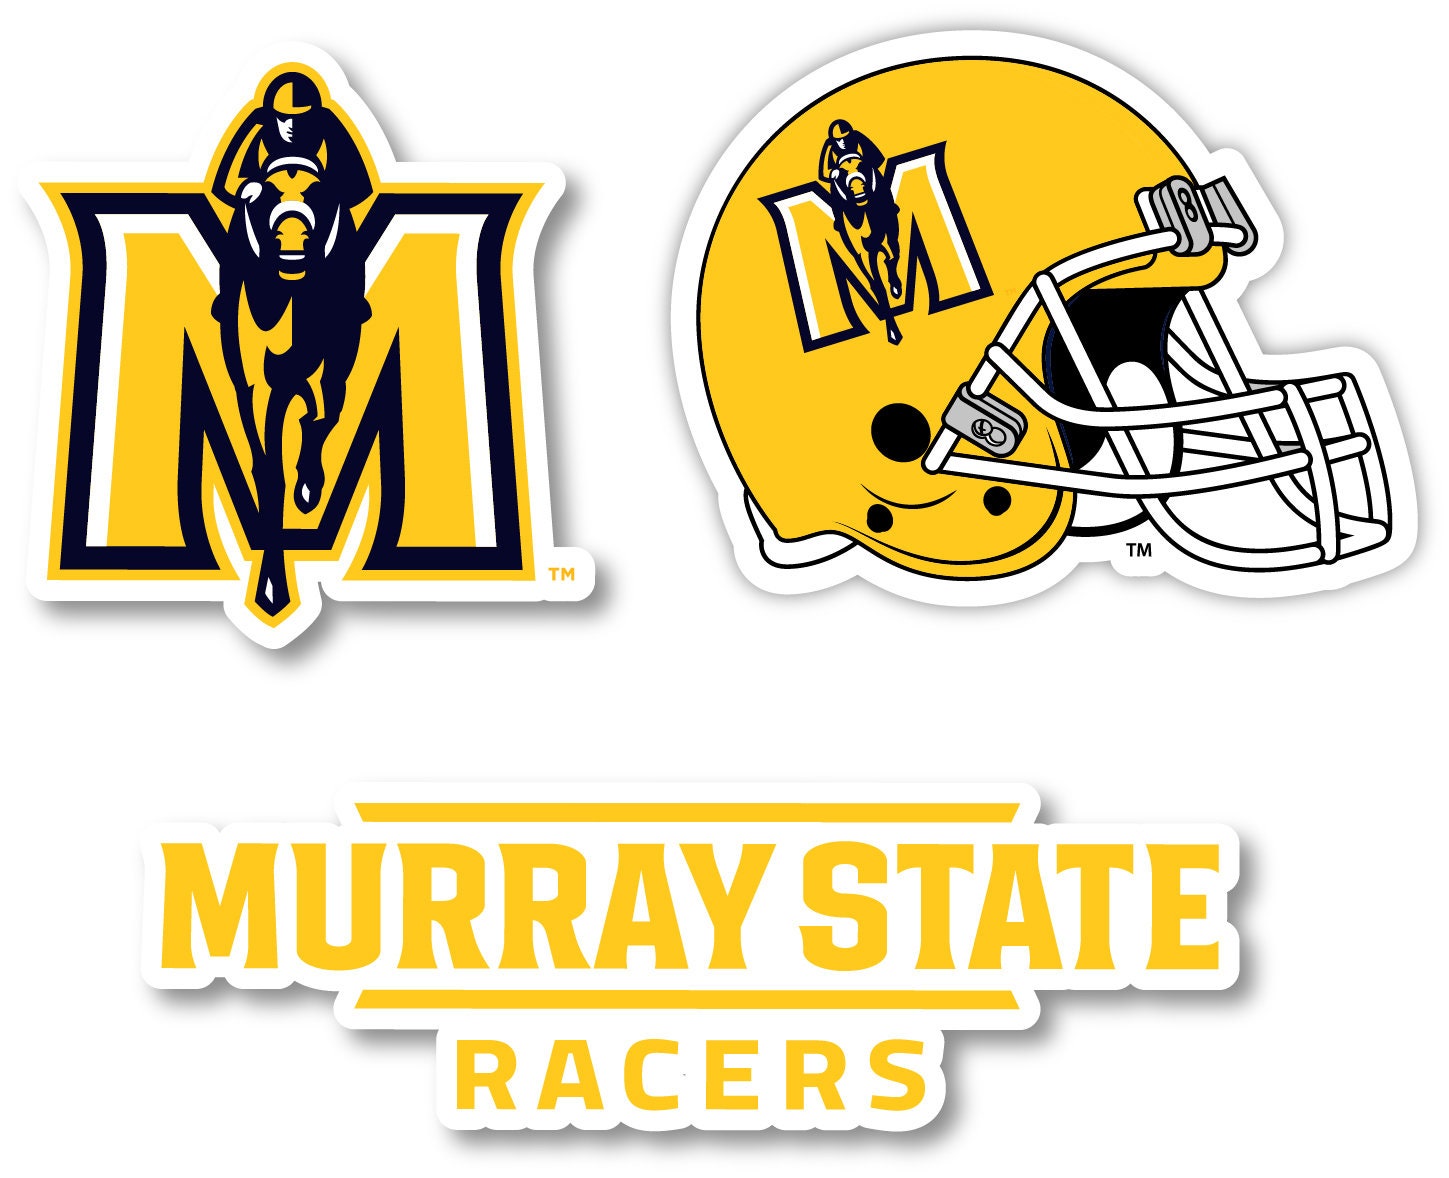 Buy Murray State online